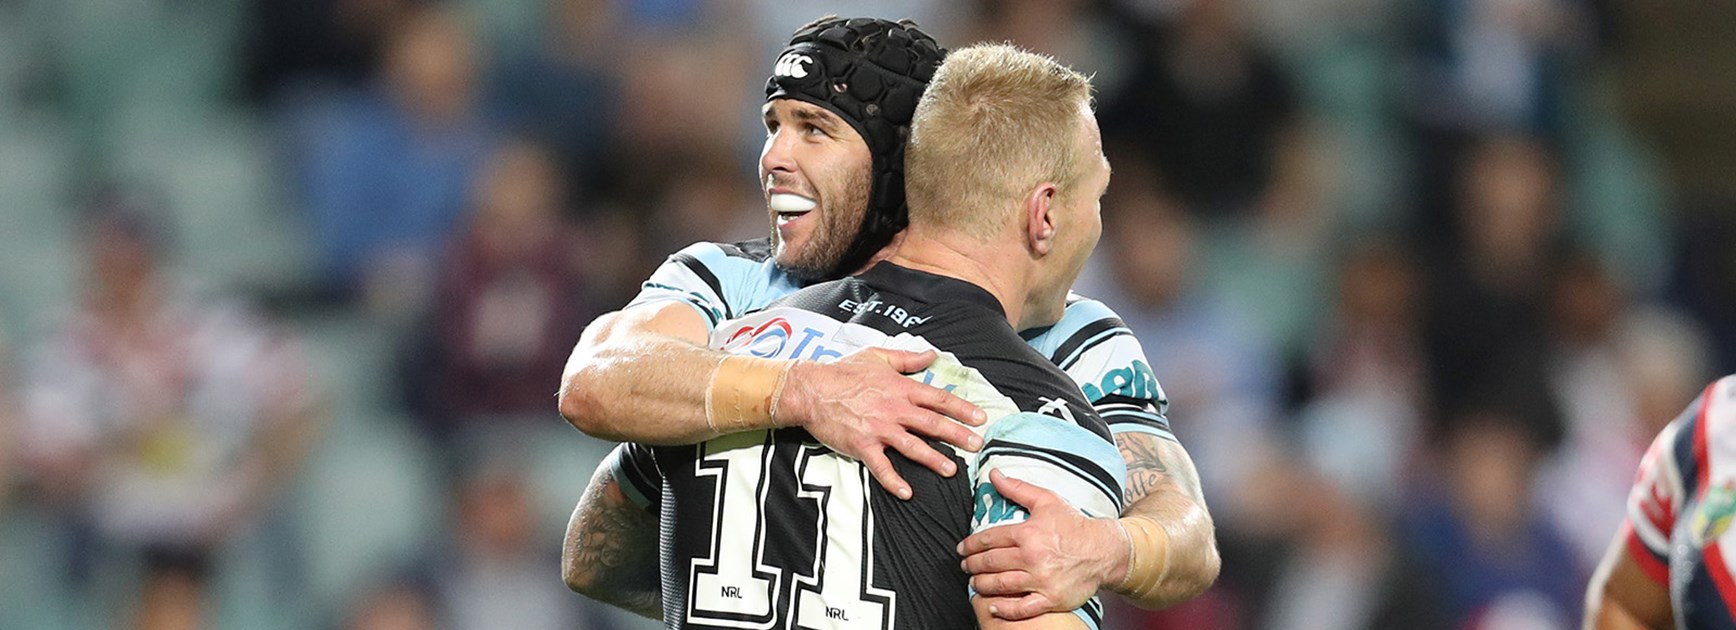 Mick Ennis and Luke Lewis celebrate a try against the Roosters in Round 19.